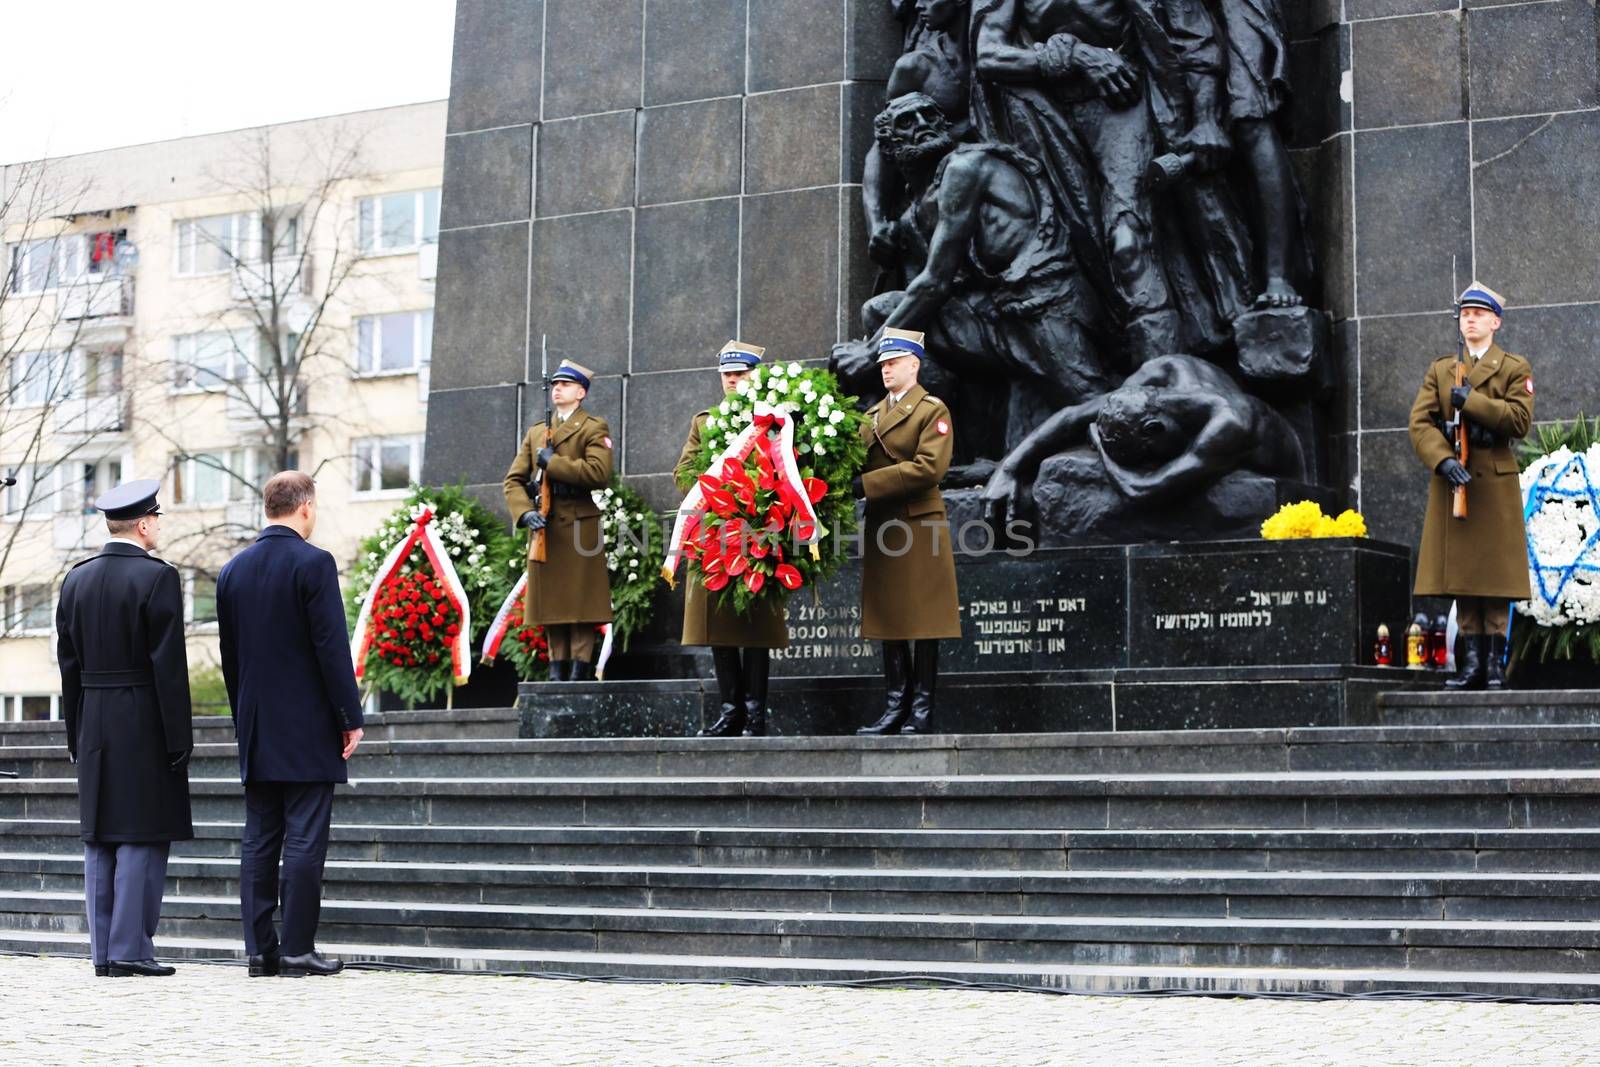 POLAND, Warsaw: An honor guard stands in front of the Ghetto Heroes Monument in Warsaw, Poland on April 19, 2016, on the 73rd anniversary of the Warsaw Ghetto uprising.Members of the state and local governments, ambassadors, as well as those who are Righteous Among Nations attended the anniversary. The ceremony took place at the spot of the first armed clashes in 1943. The uprising started when Jewish residents of the ghetto refused surrender to the Nazi police commander. The entire ghetto was burned and the clashes ended on May 16. An estimated 13,000 people in the ghetto were killed in the revolt.